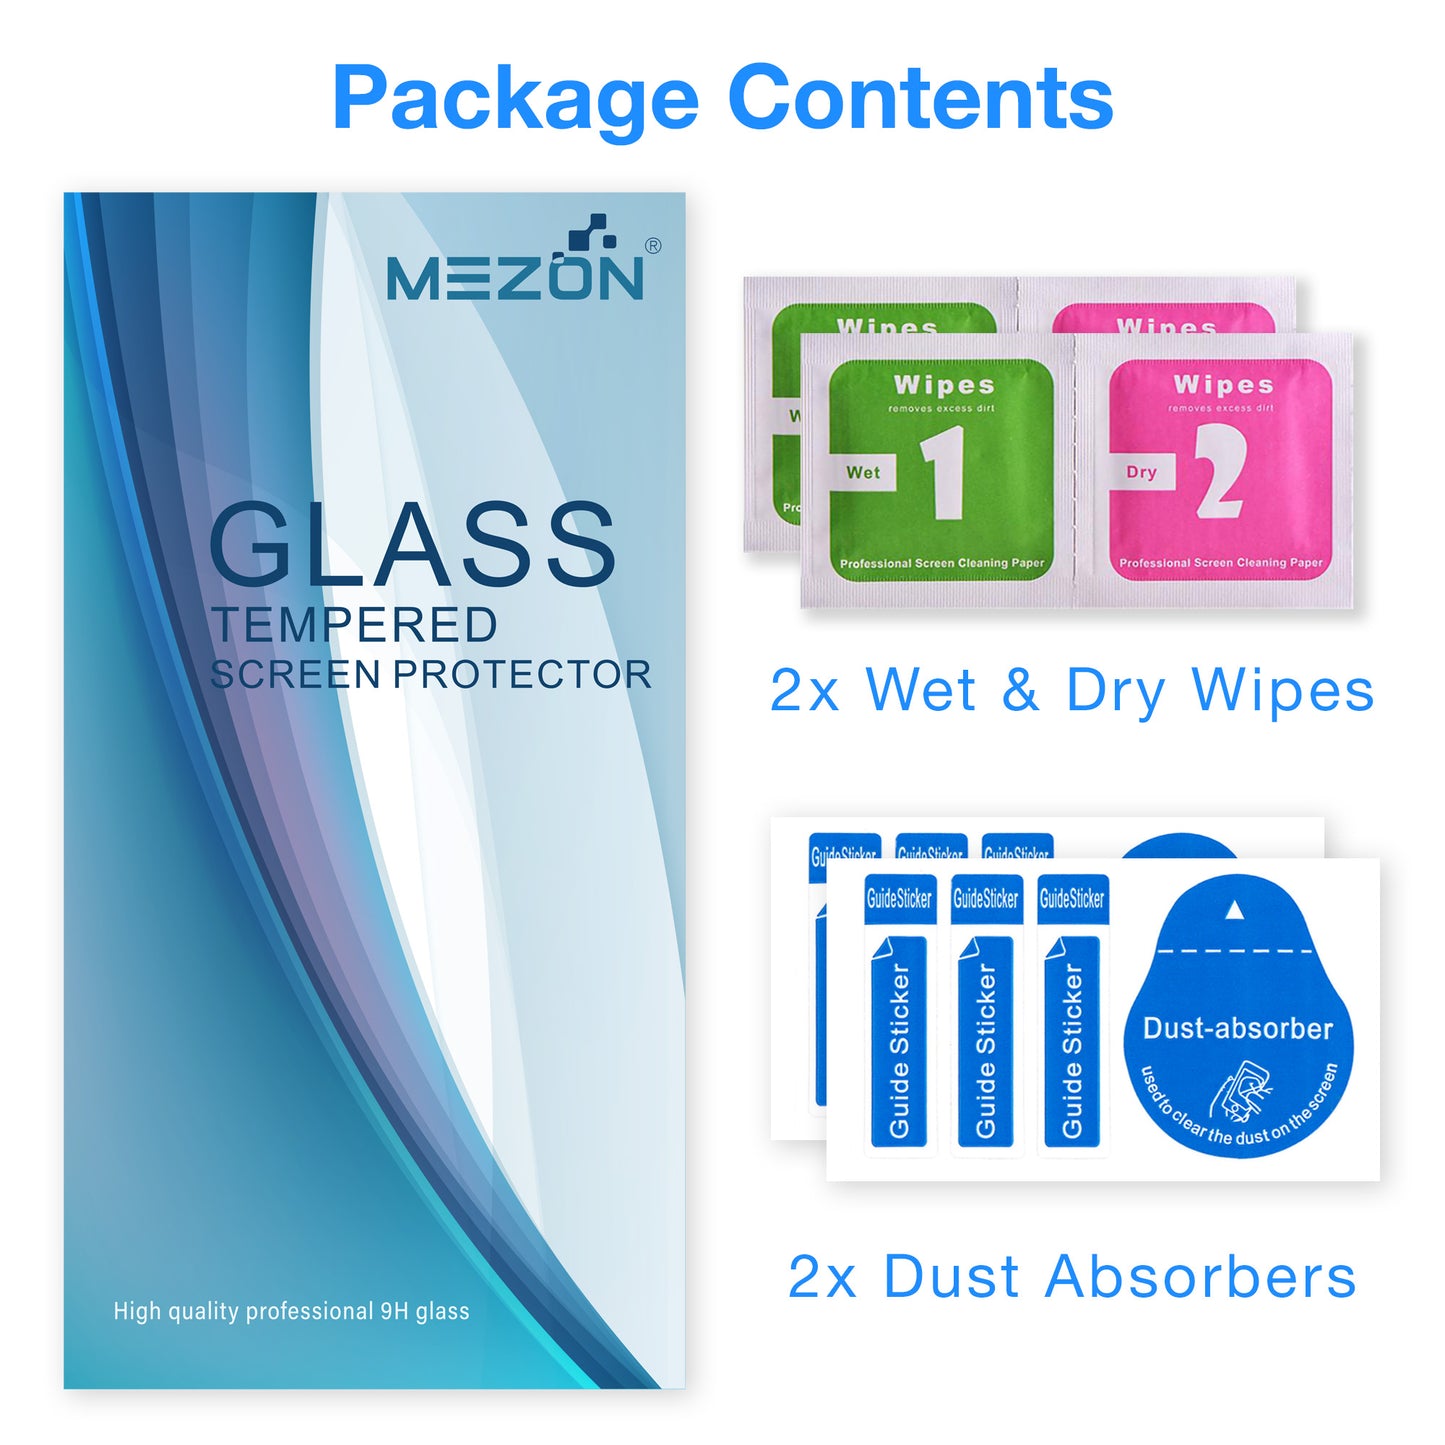 [2 Pack] MEZON Full Coverage Tempered Glass for iPhone 13 (6.1") Crystal Clear Premium 9H HD Screen Protector